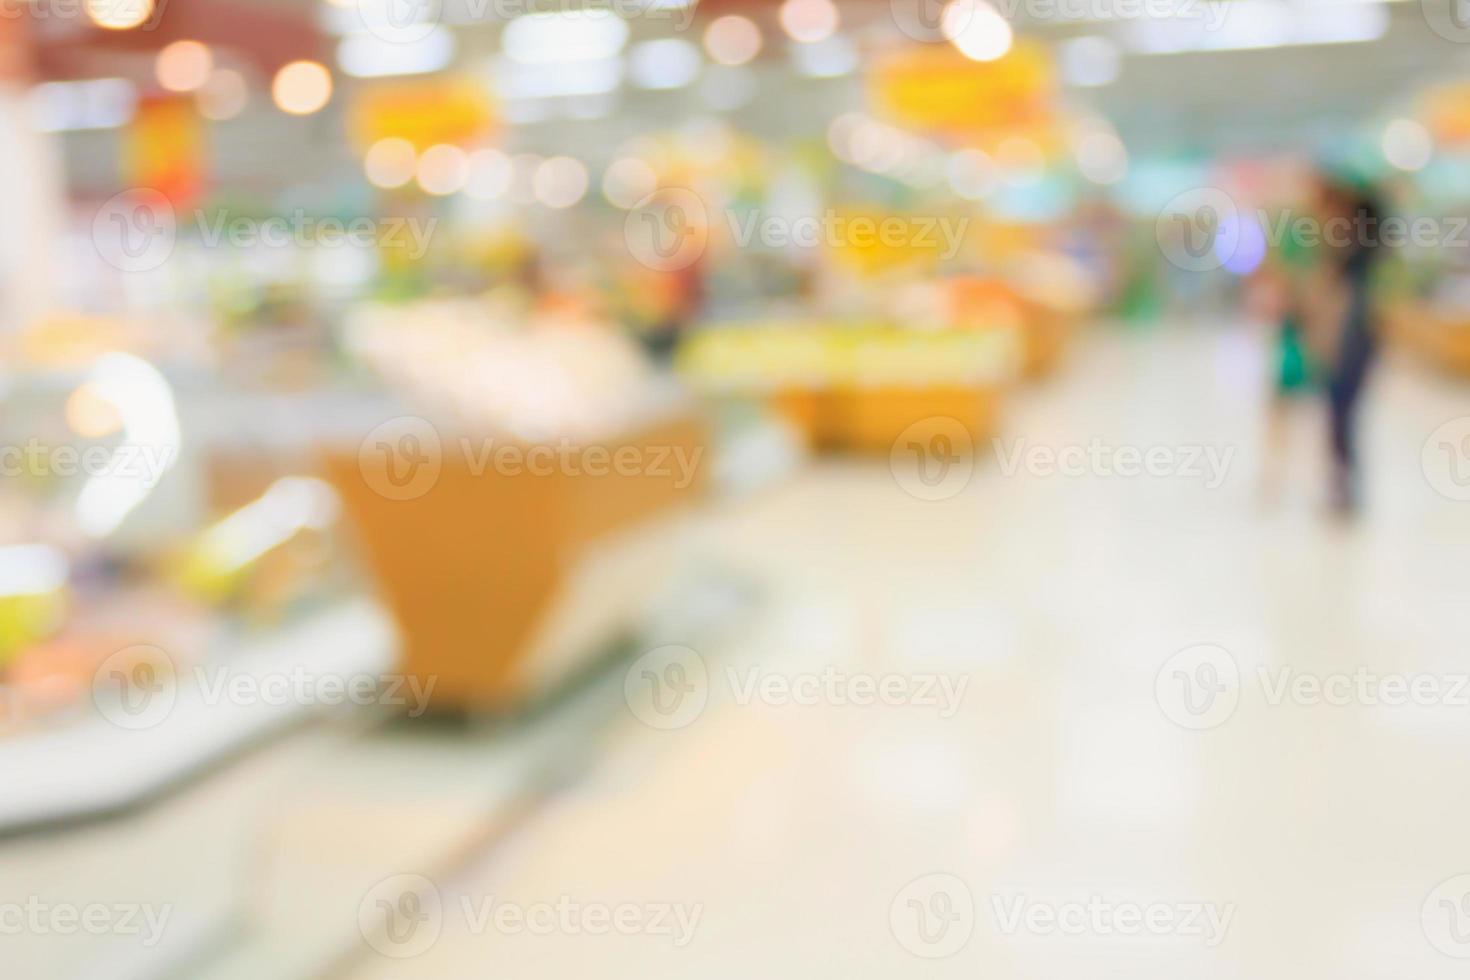 Supermarket blurred background with bokeh photo